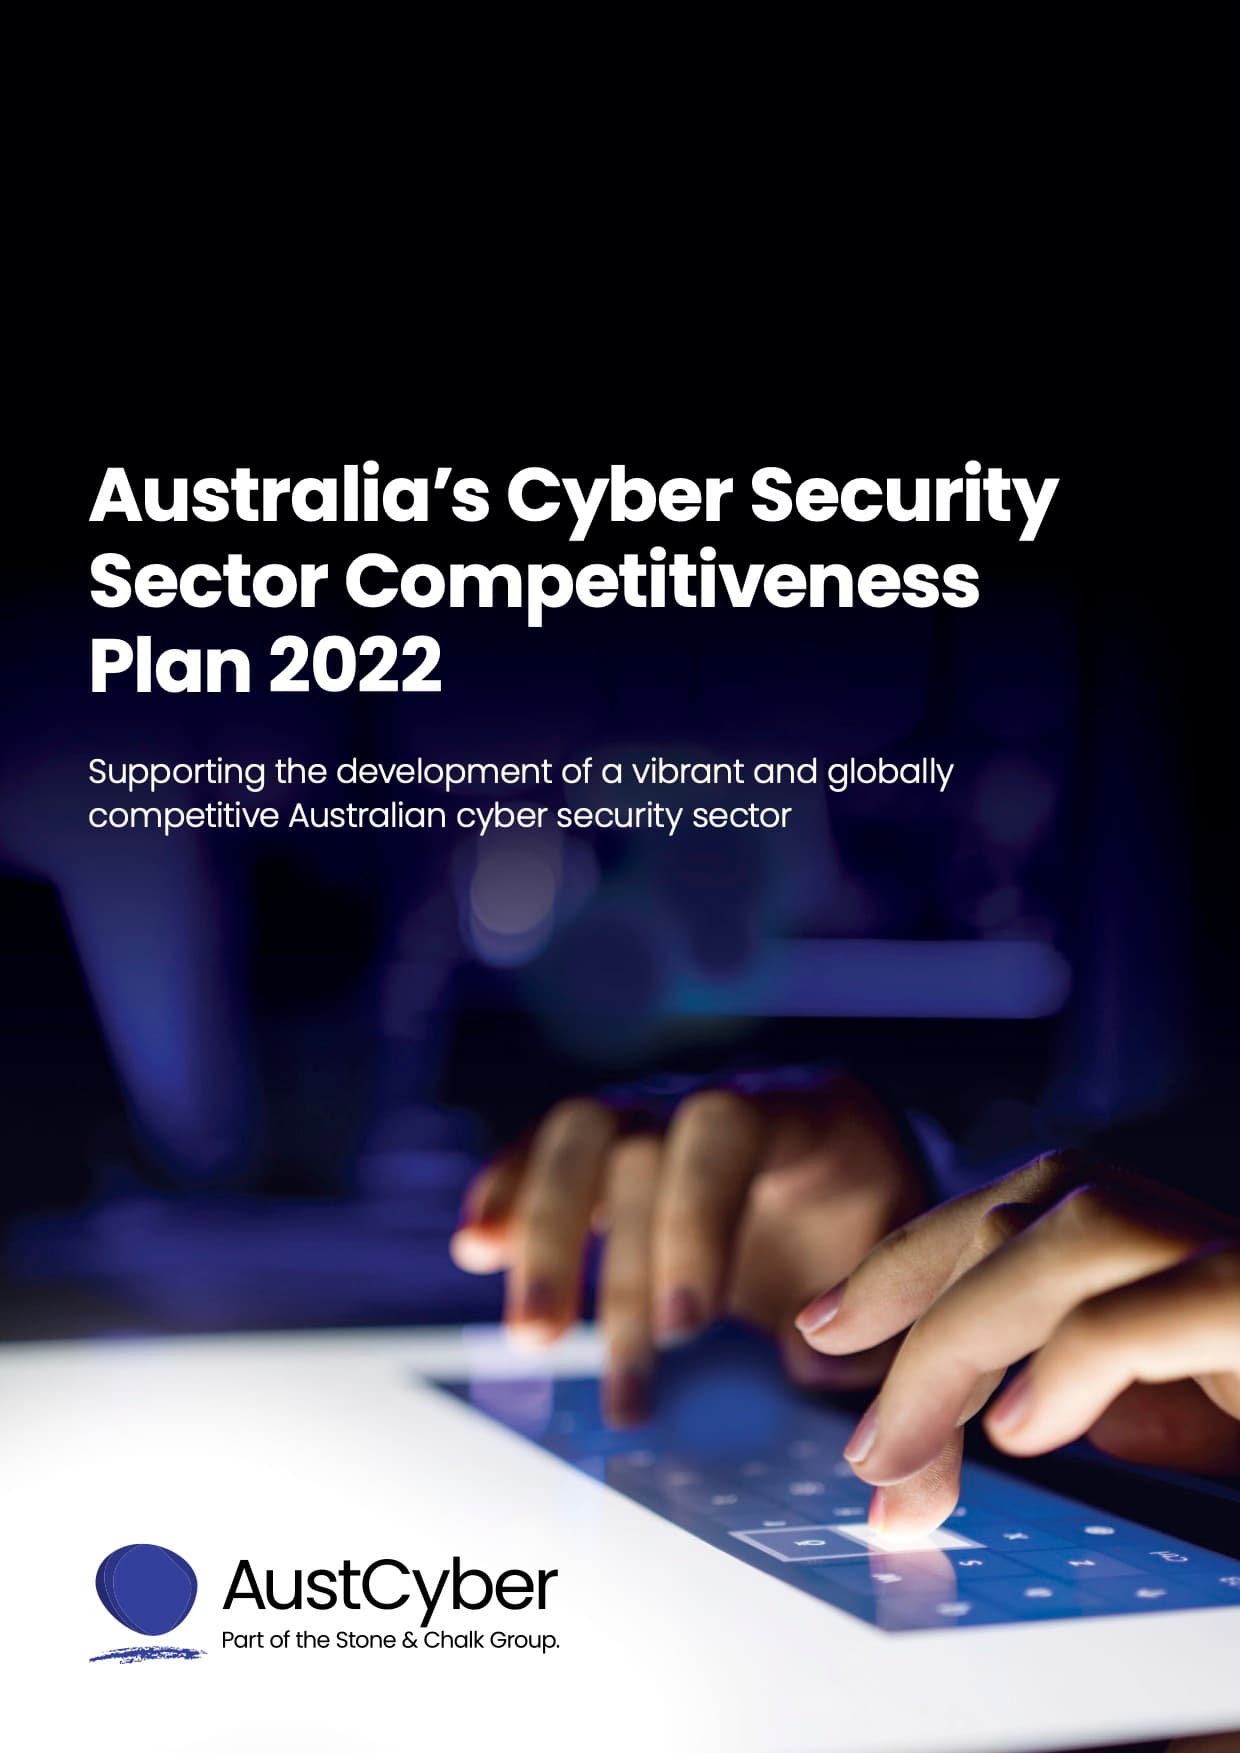 Australia's Cyber Security Sector Competetiveness Plan 2022